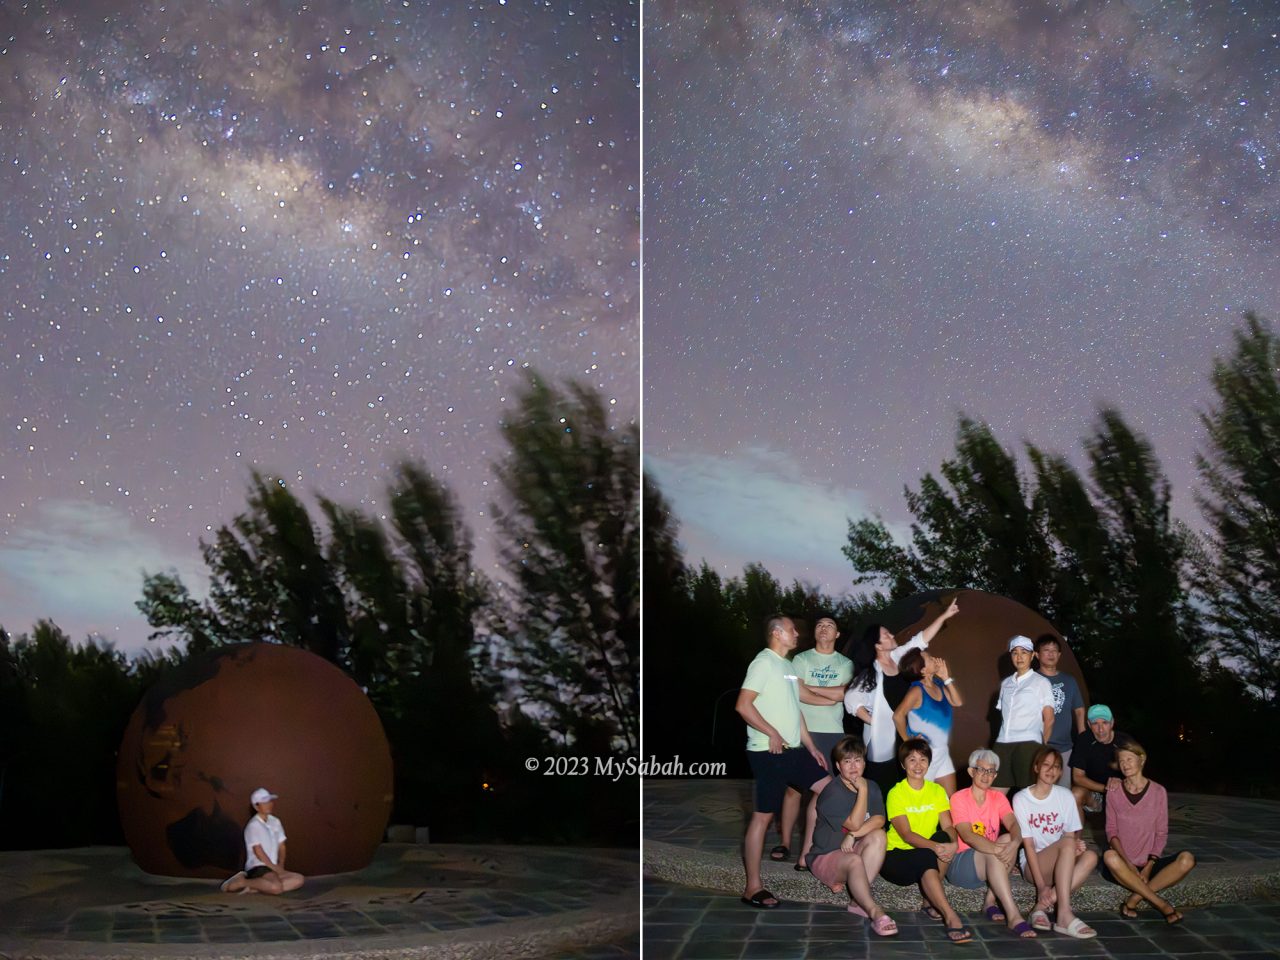 Starry night at the Tip of Borneo